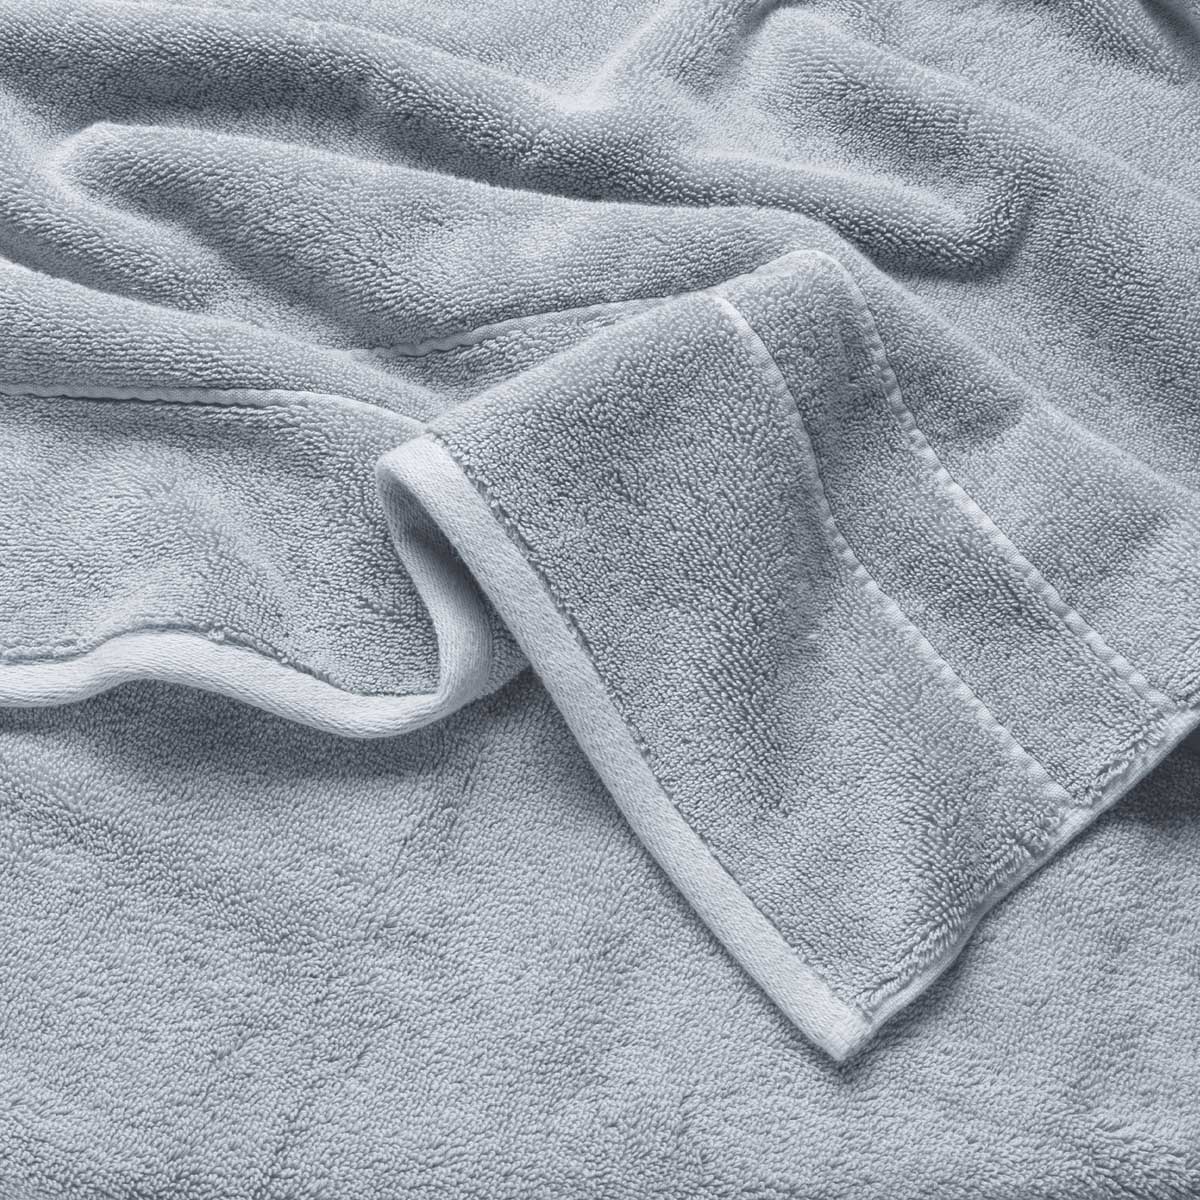 Premium Plush Bath Towel in the color Harbor Mist. Photo of Harbor Mist Premium Plush Bath Towel taken as a close up only showing the Premium Plush Bath Towel |Color:Harbor Mist